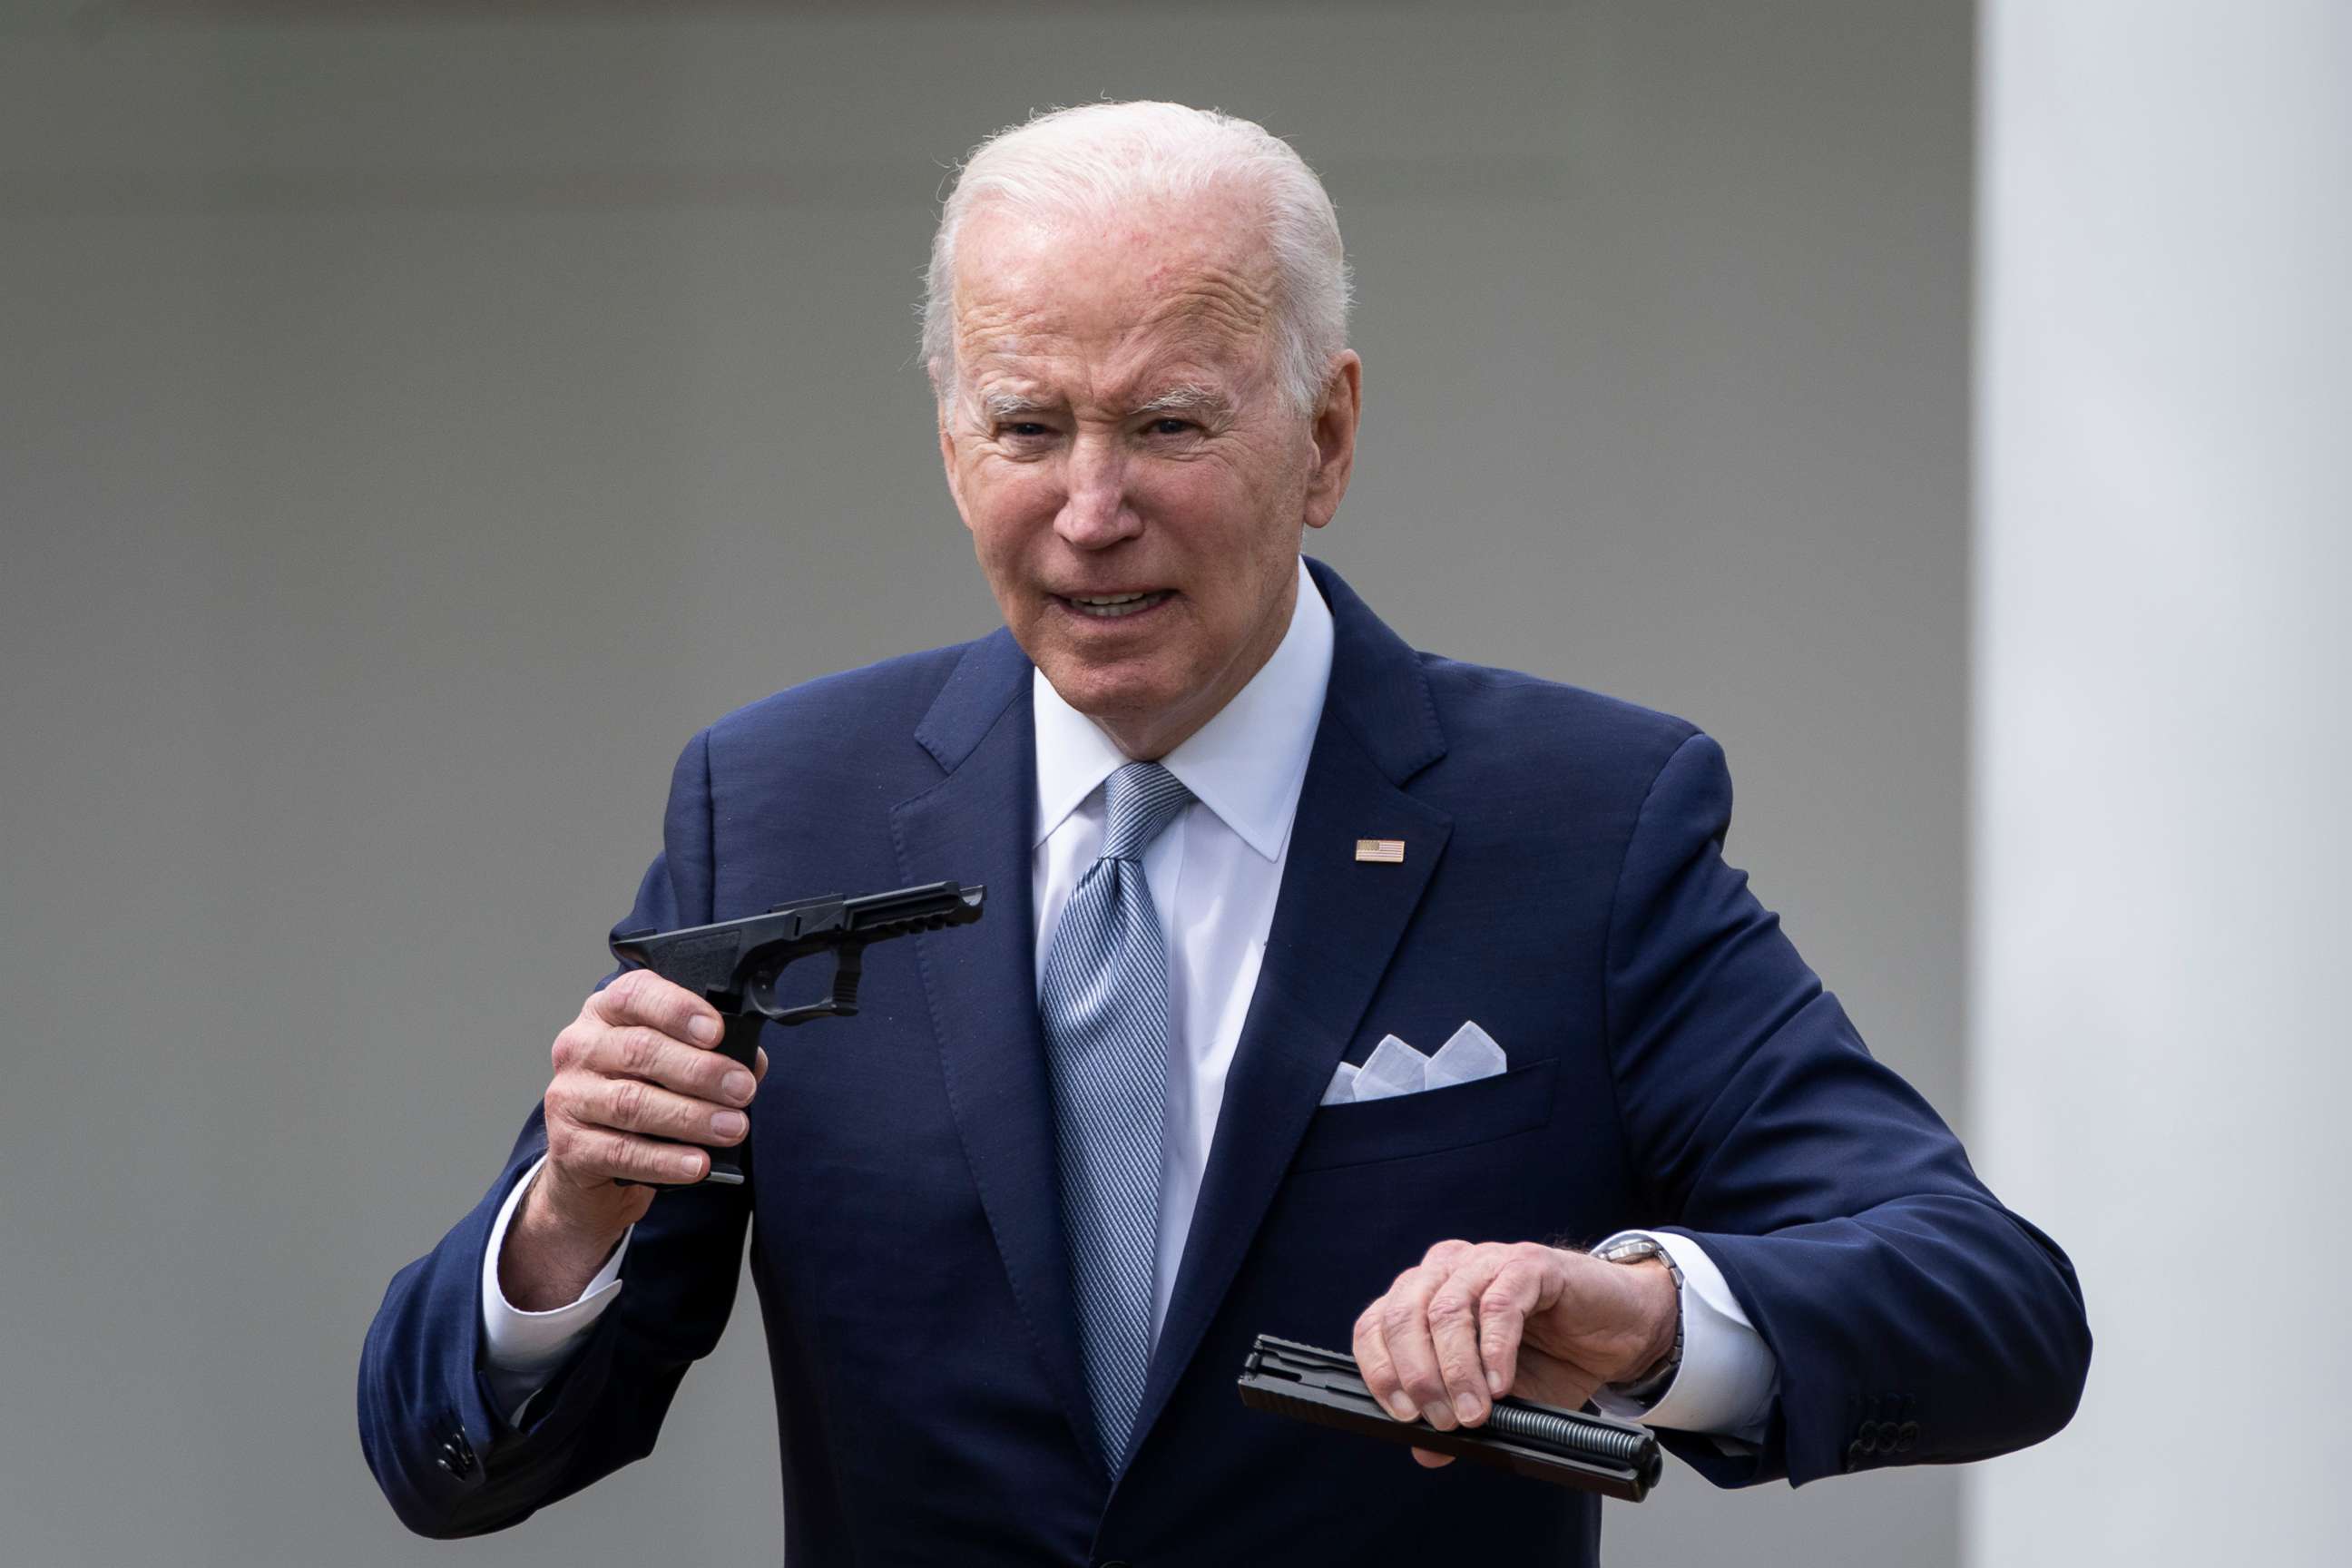 PHOTO: President Joe Biden holds up a ghost gun kit during an event about gun violence in the Rose Garden of the White House in Washington, April 11, 2022.